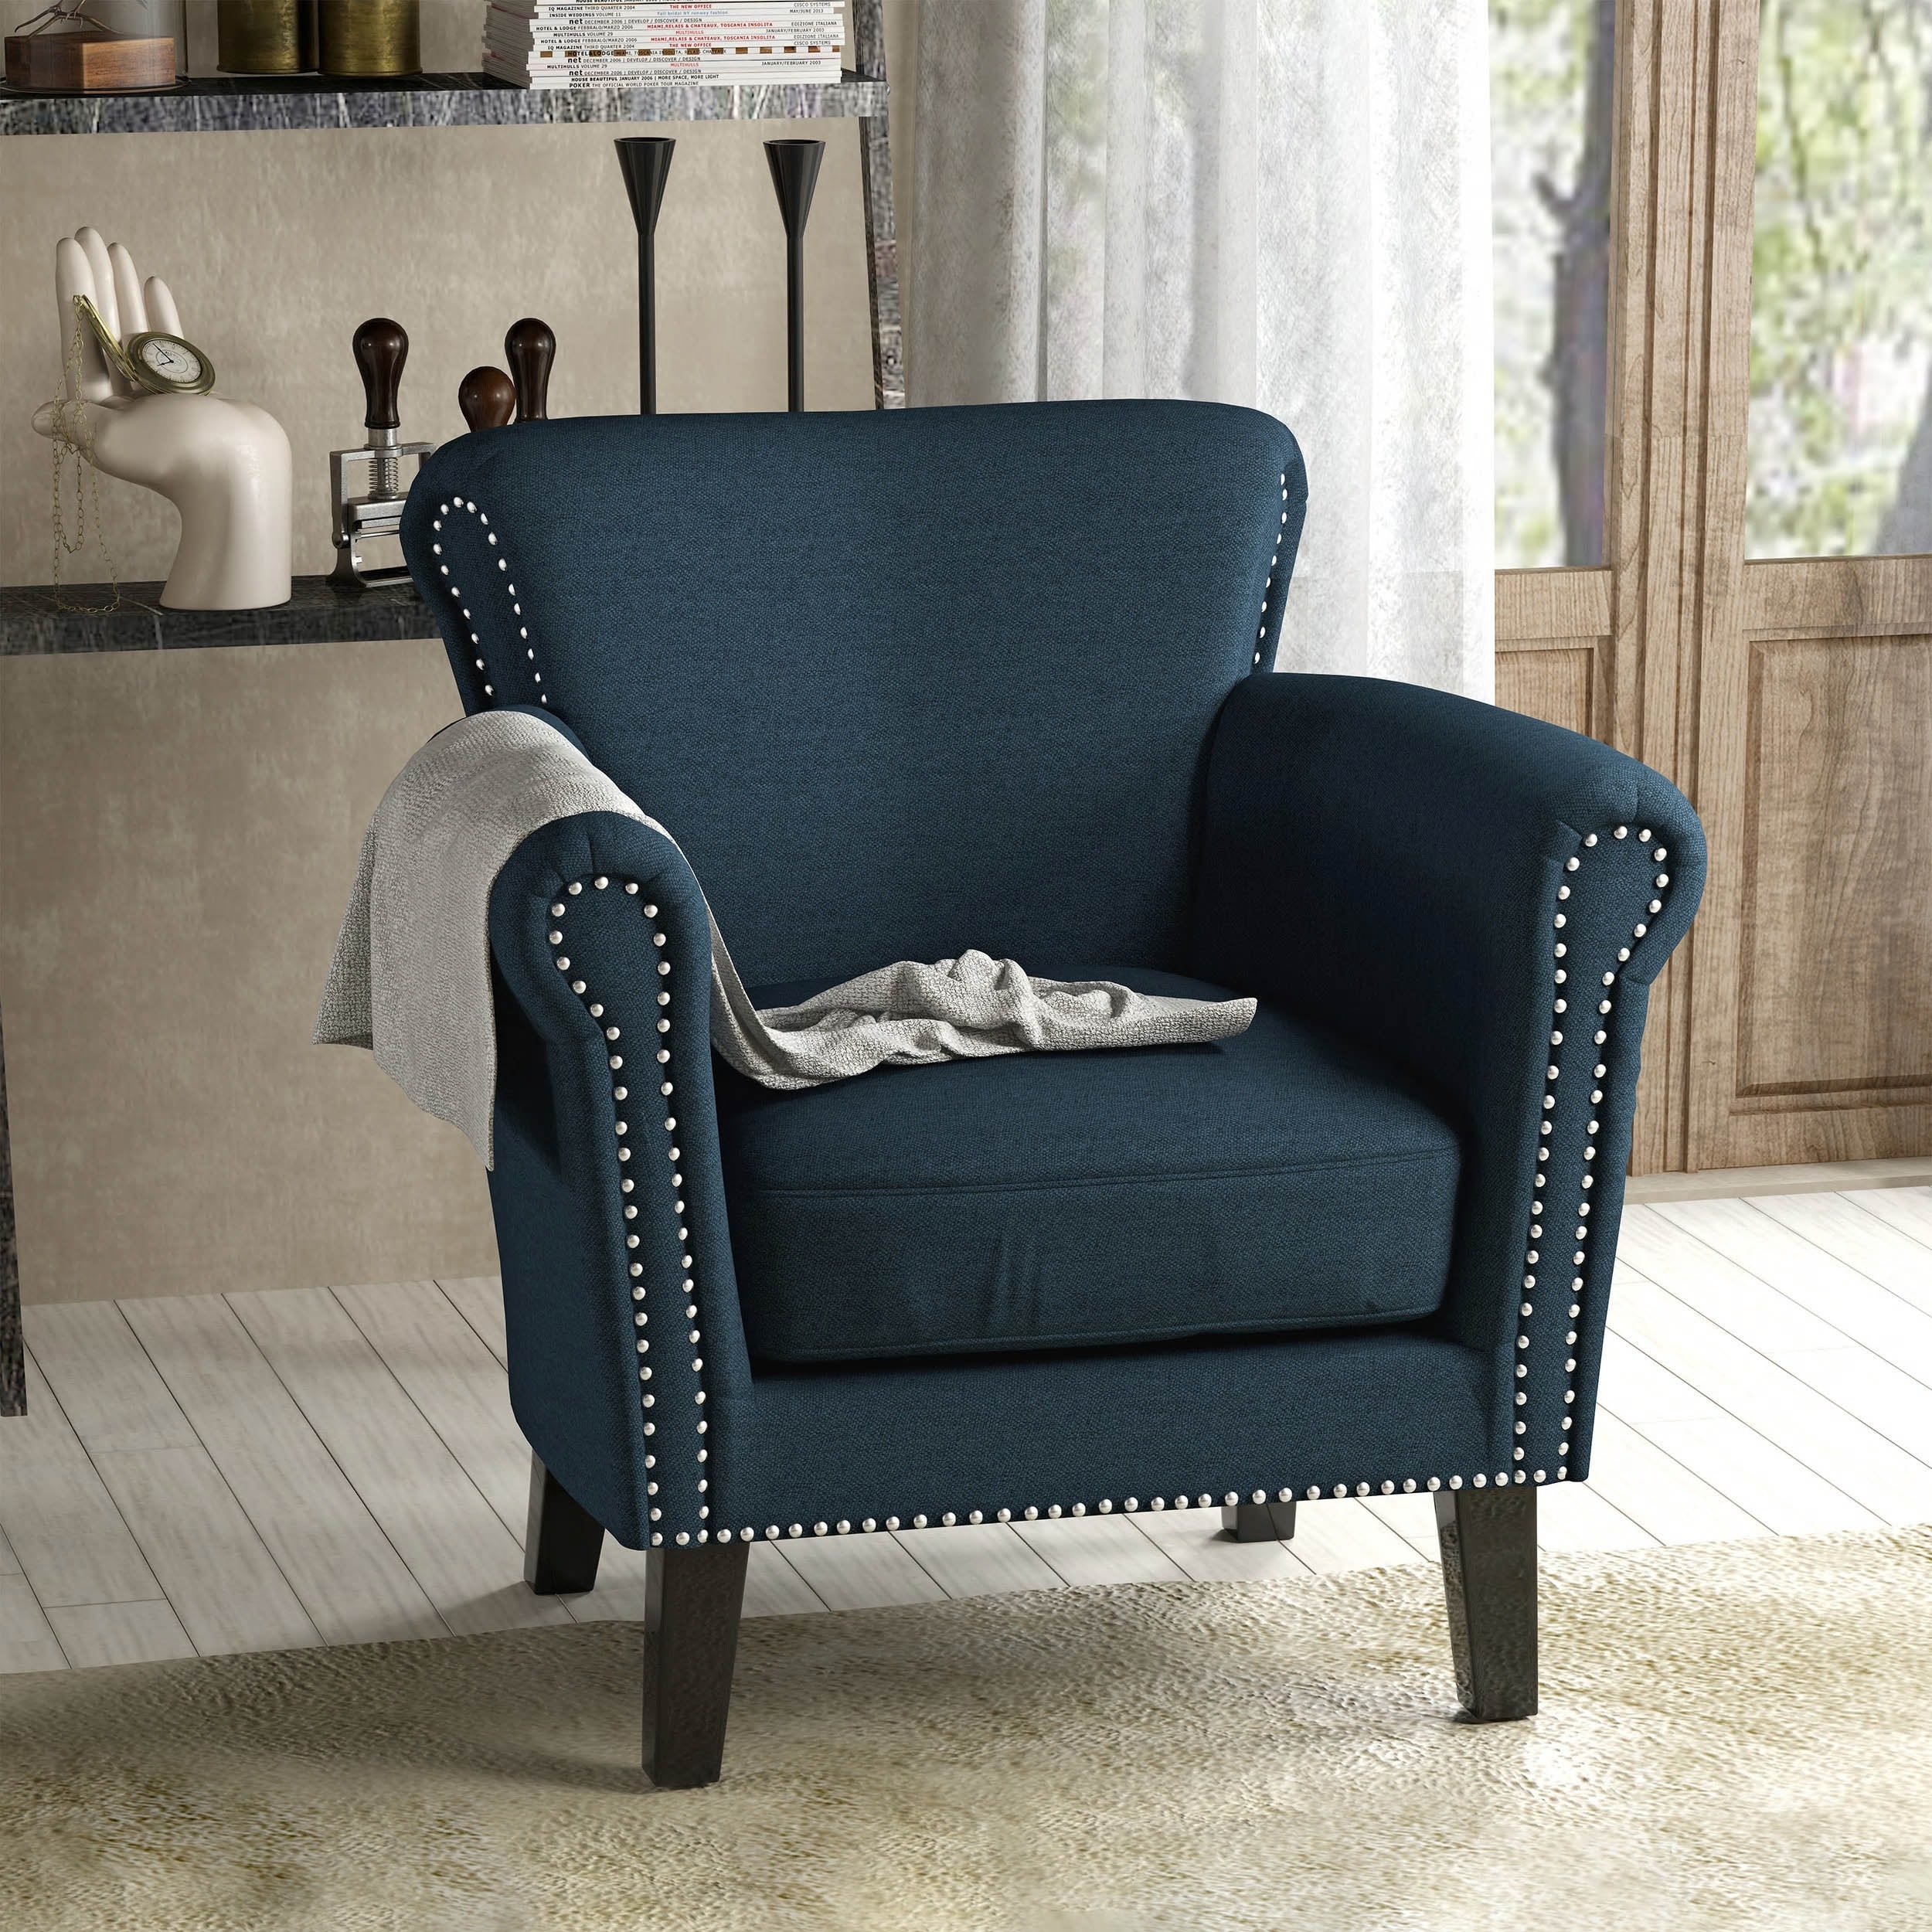 Brice Contemporary Scroll Arm Club Chair with Nailhead Trim by Christopher Knight Home